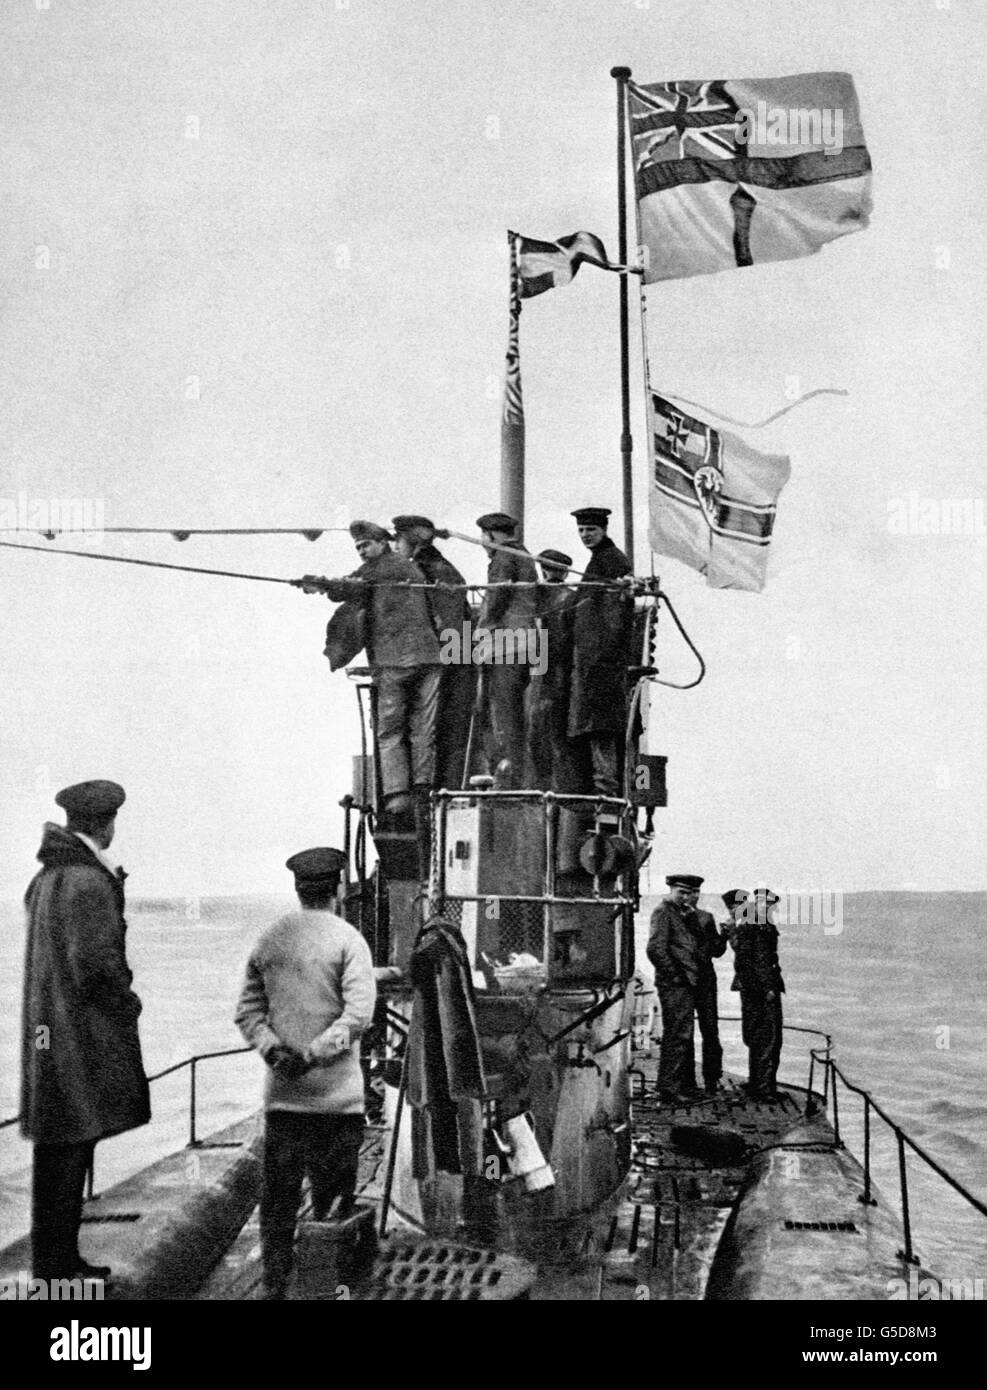 A view of the surrender of the German submarine U-48 to the Royal Navy at the Essex port of Harwich. The U-48 was one of 39 U-Boats to surrender, most of them in perfect condition. The White Ensign can be seen flying above the Imperial German Navy flag. Stock Photo